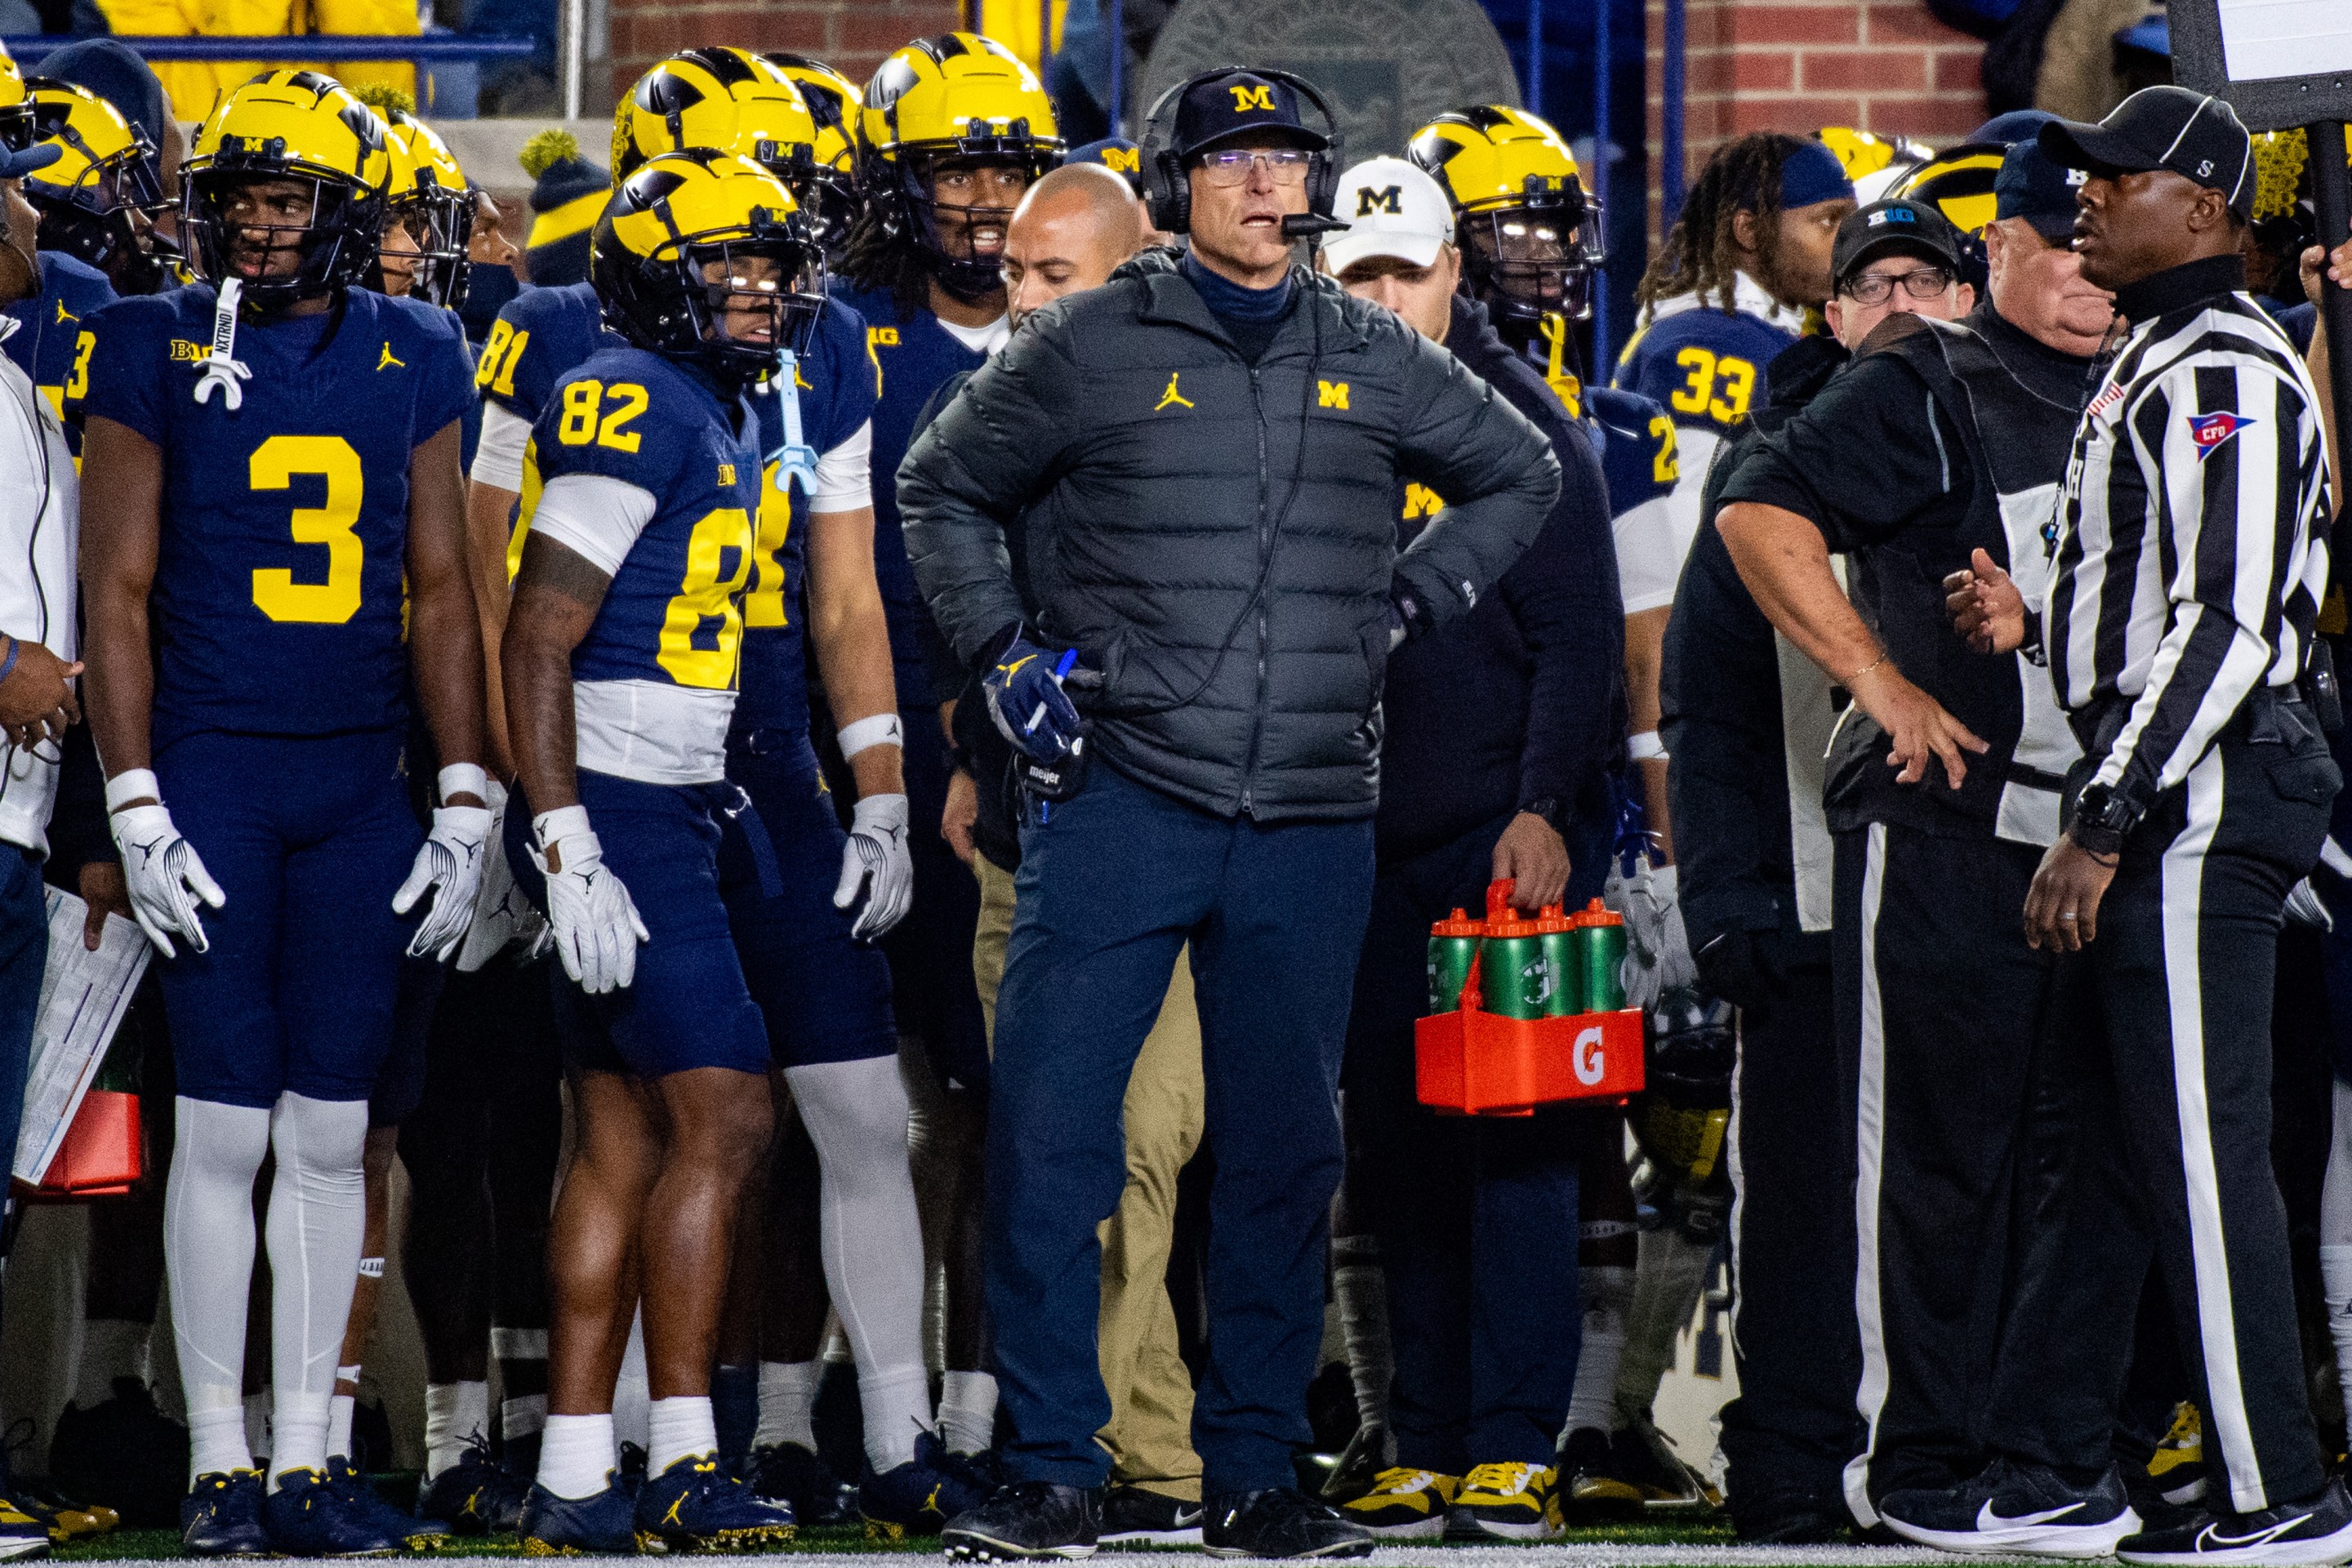 Head Football Coach Jim Harbaugh of the Michigan Wolverines is seen on the sideline during the first half a college football game against the Purdue Boilermakers at Michigan Stadium on November 04, 2023 in Ann Arbor, Michigan.